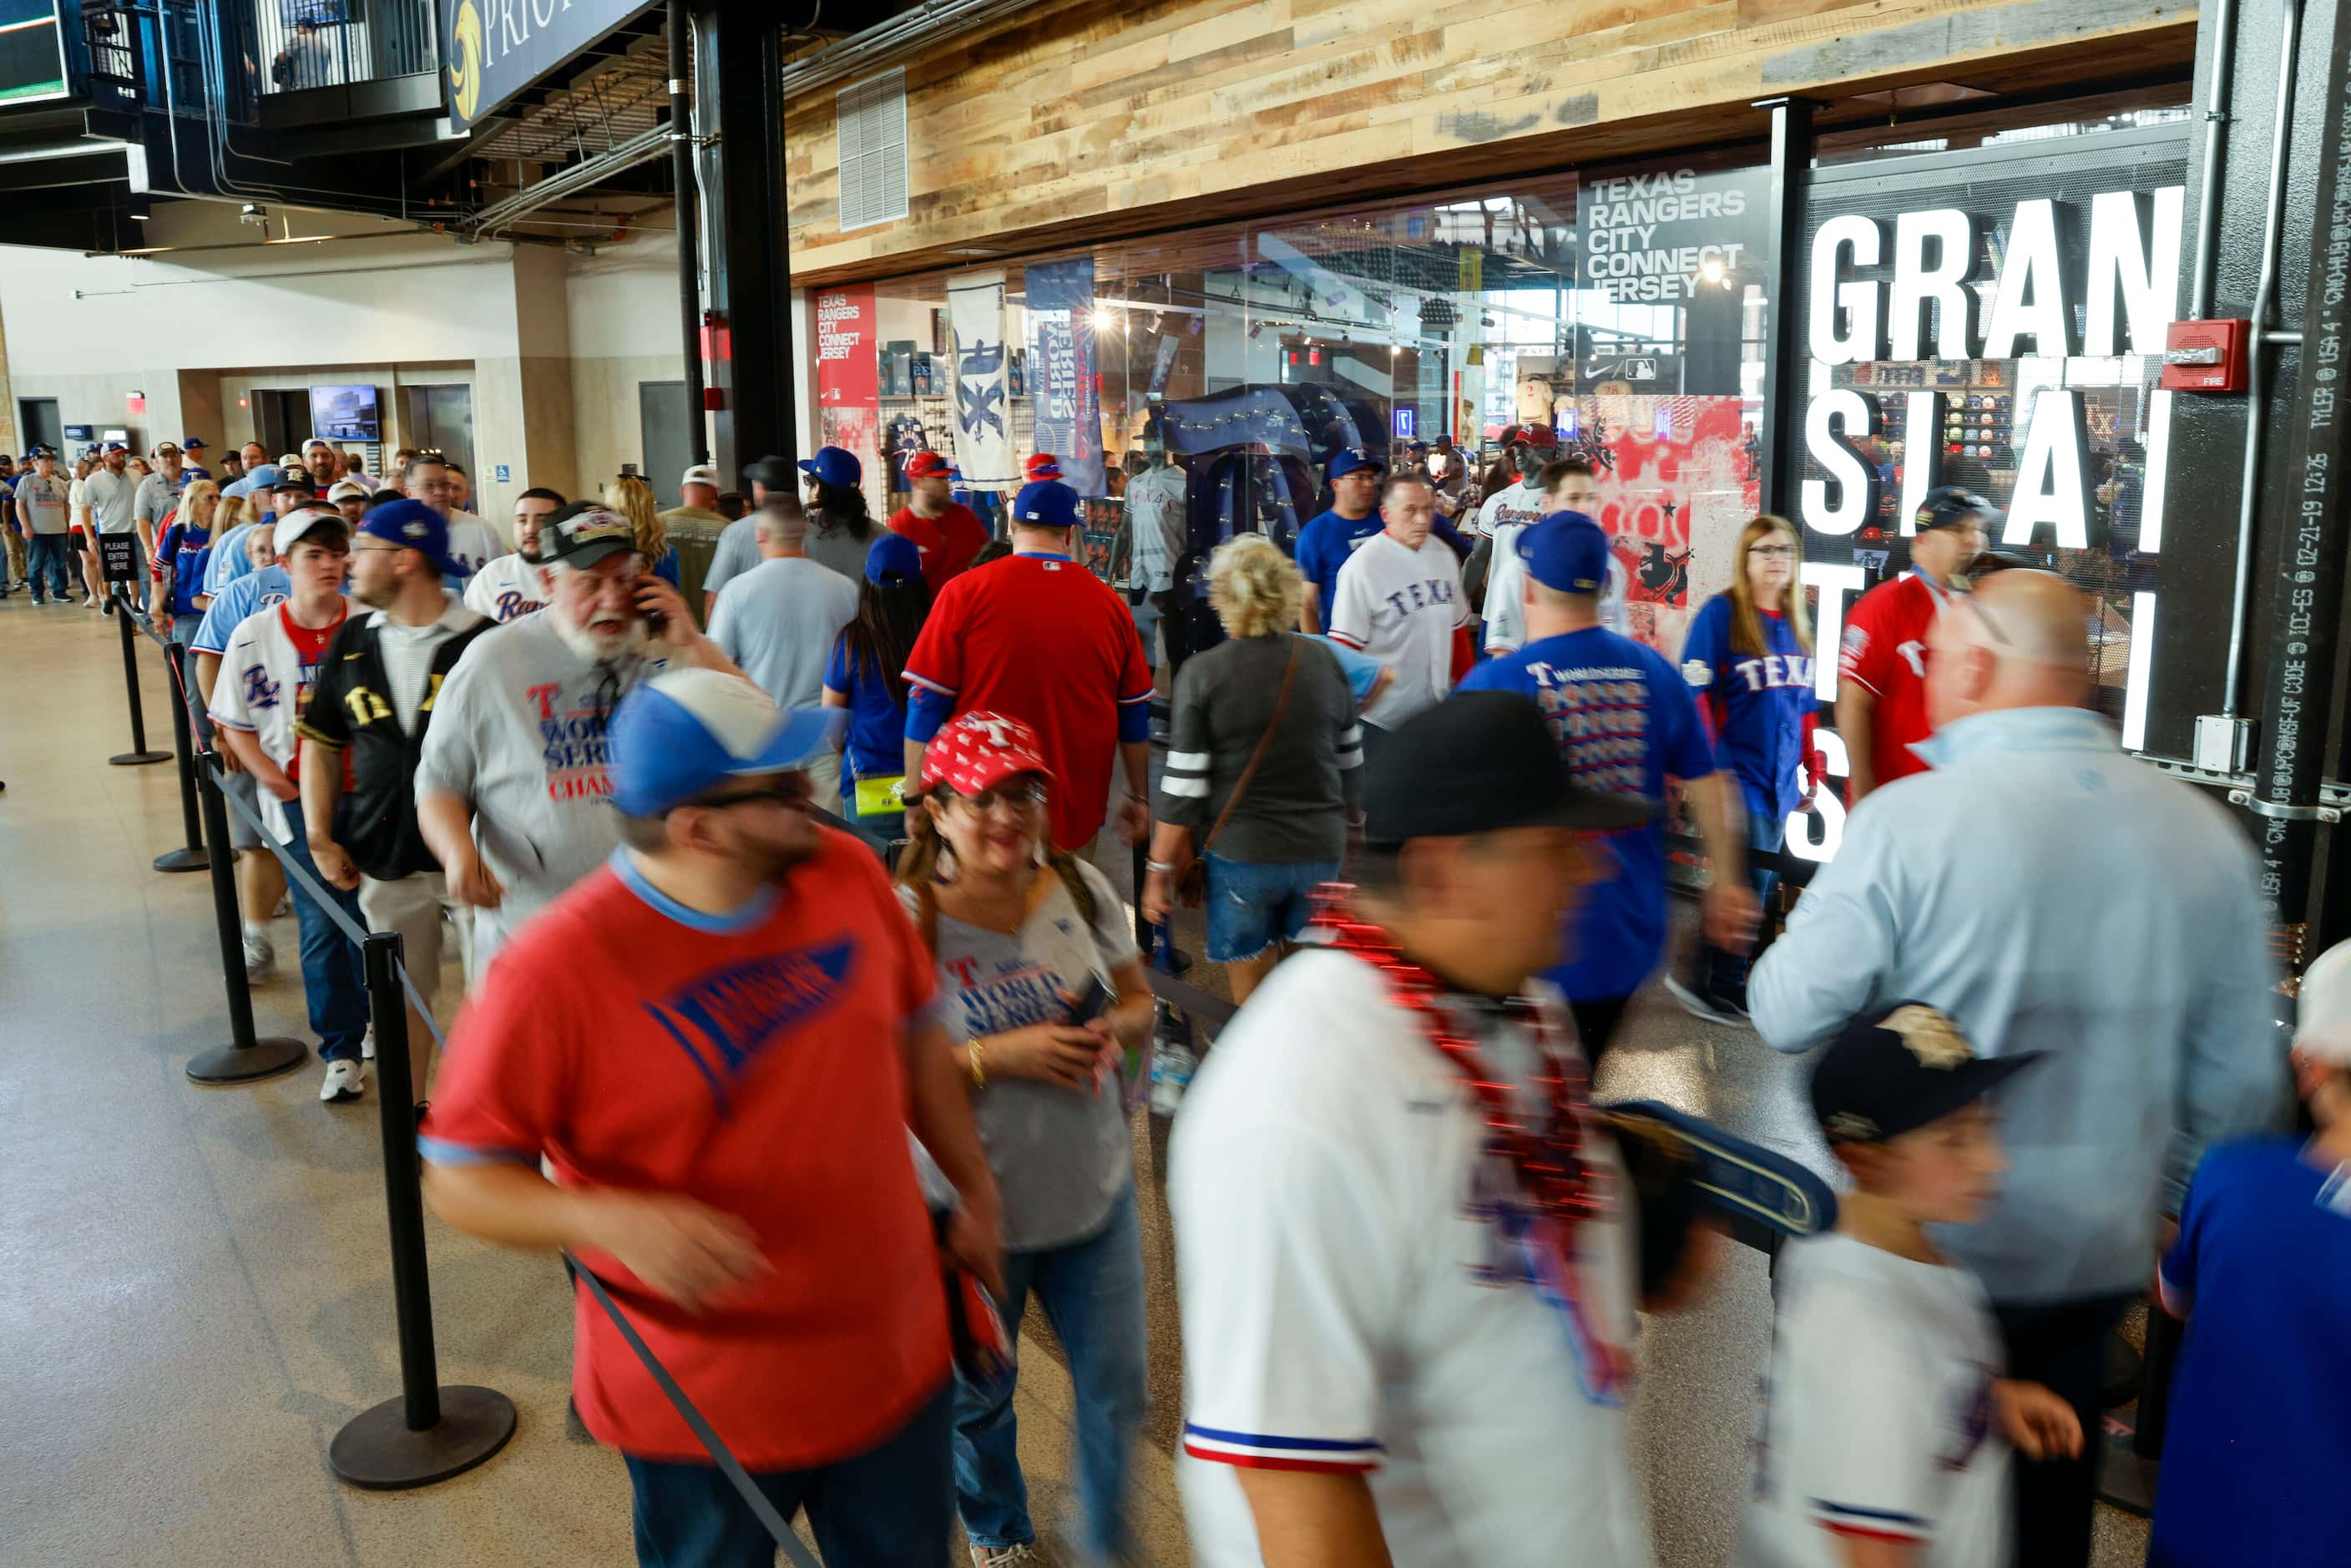 Dozens of Texas Rangers fans move through a line to enter the Grand Slam Team Store before...